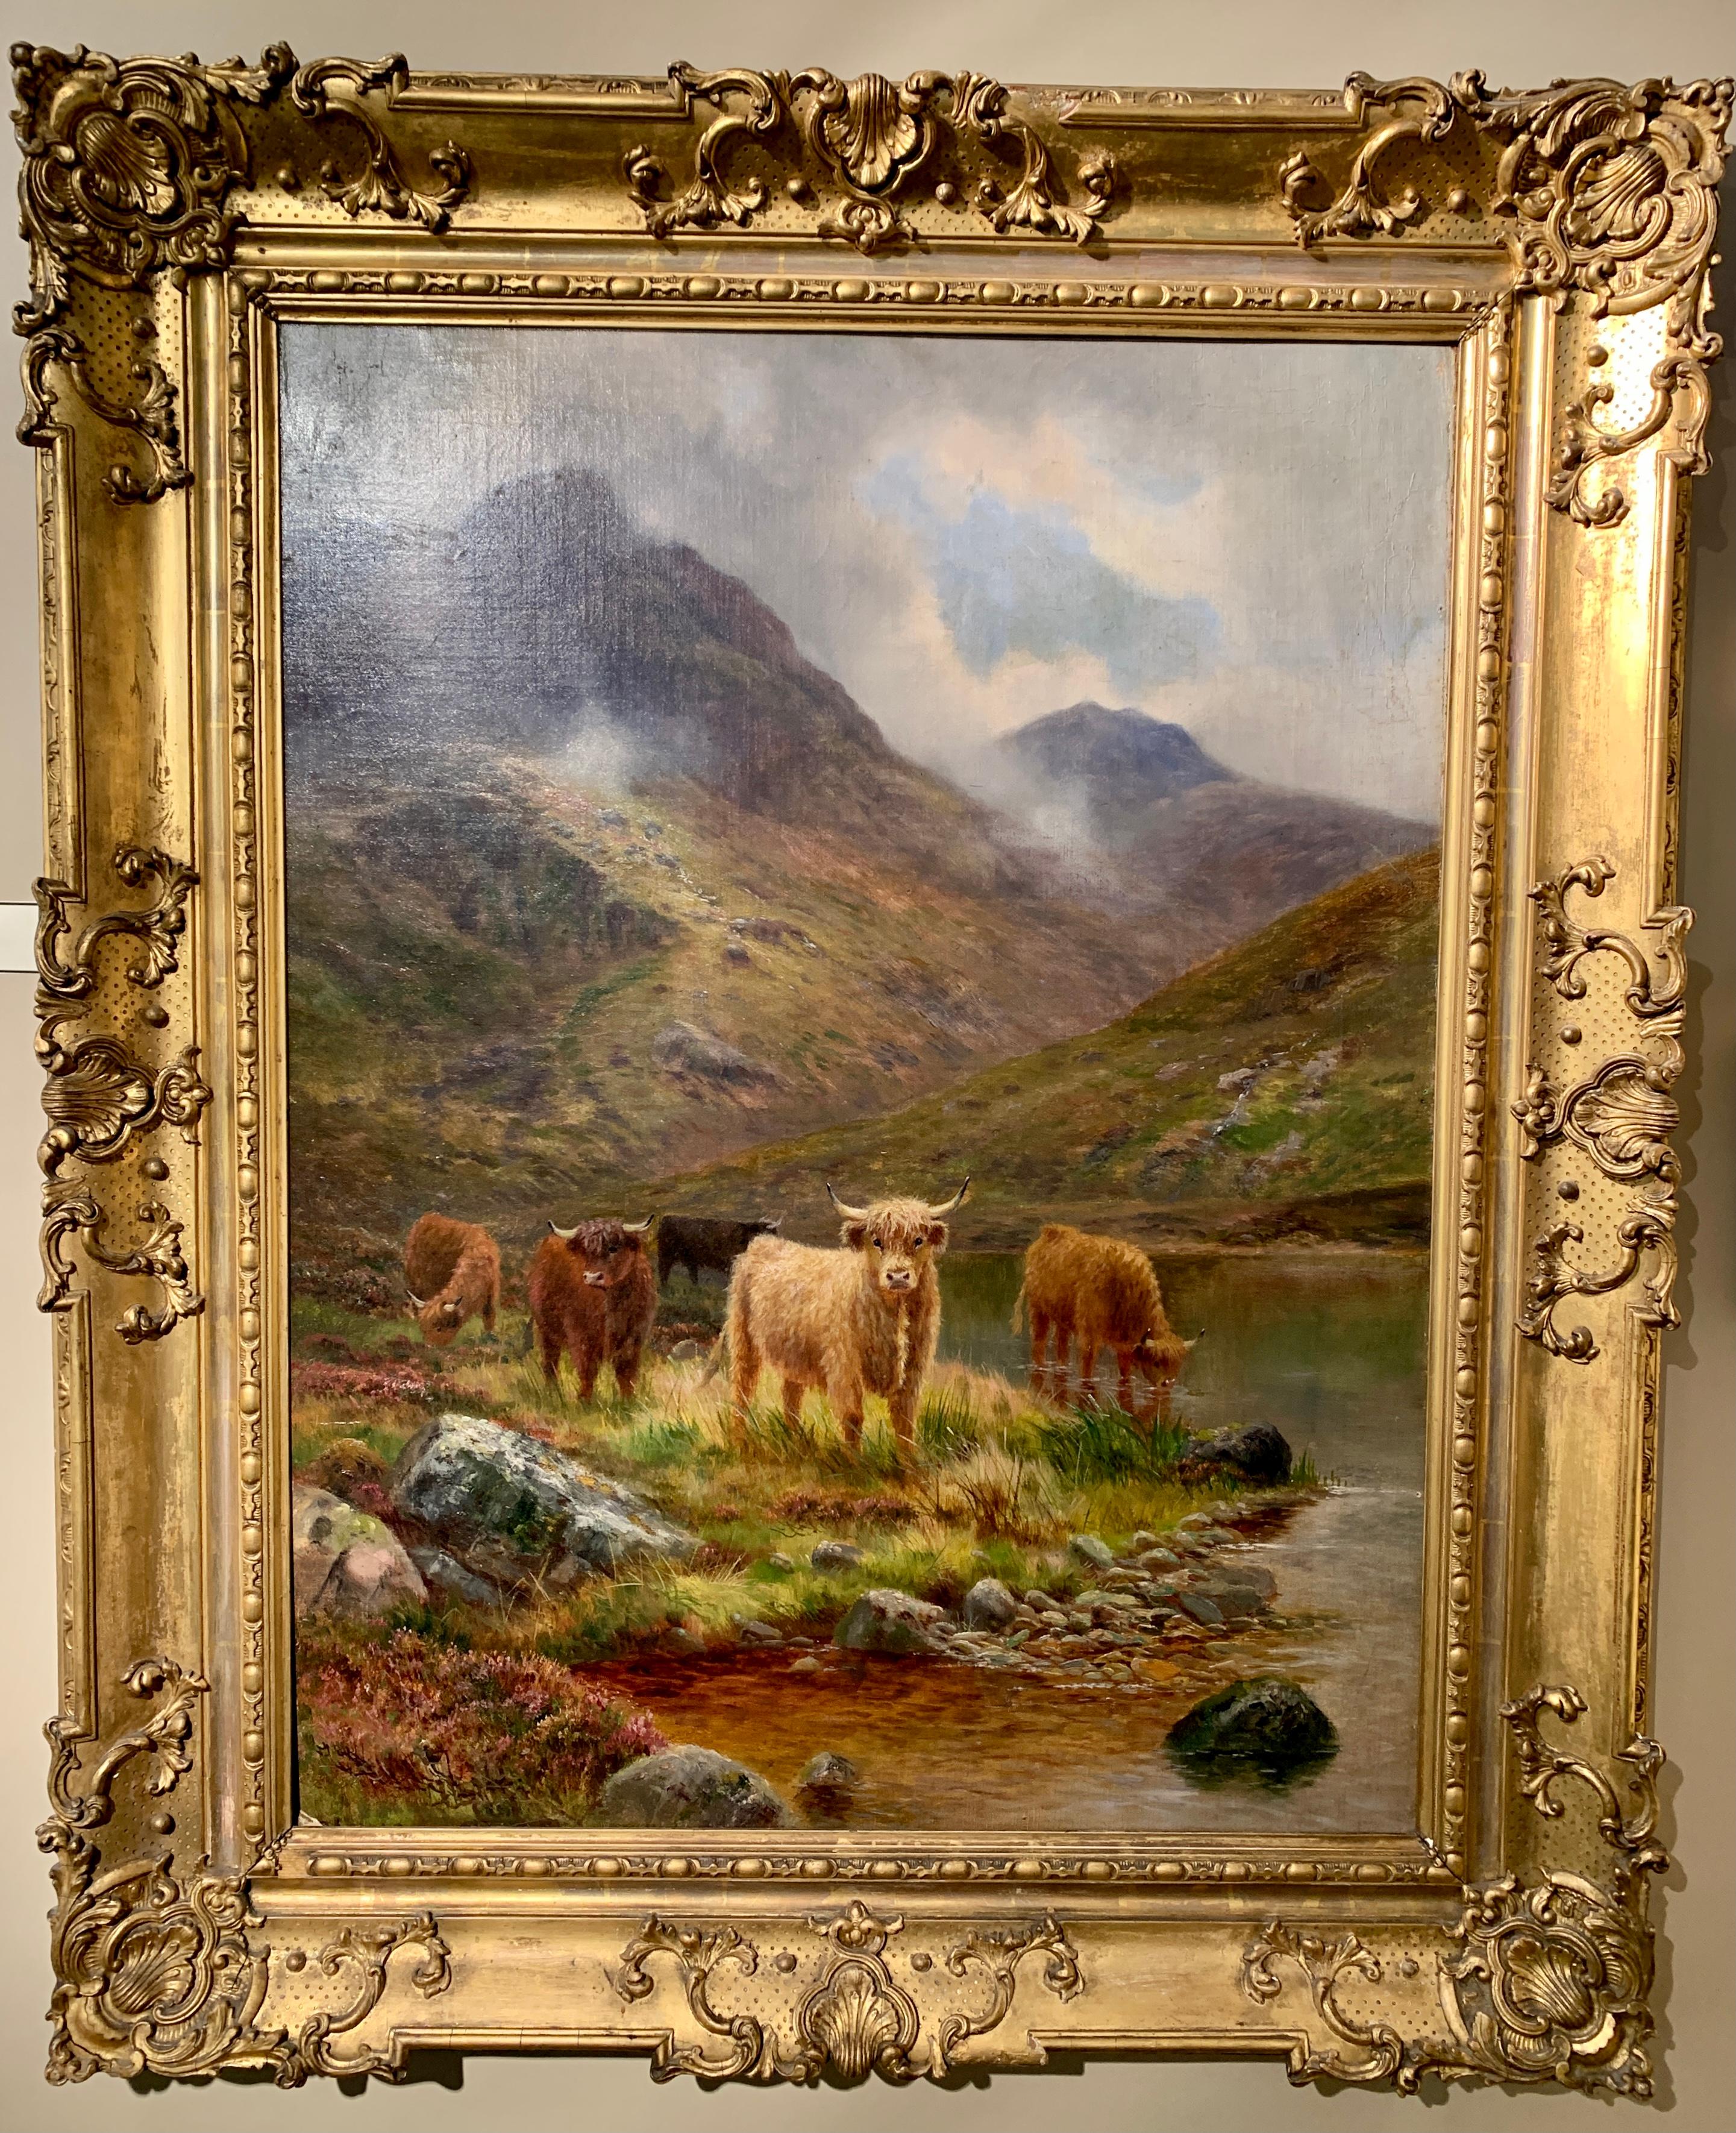 Daniel Sherrin Landscape Painting - 19thc Scottish landscape scene with woolly Cows and Bulls in the highlands